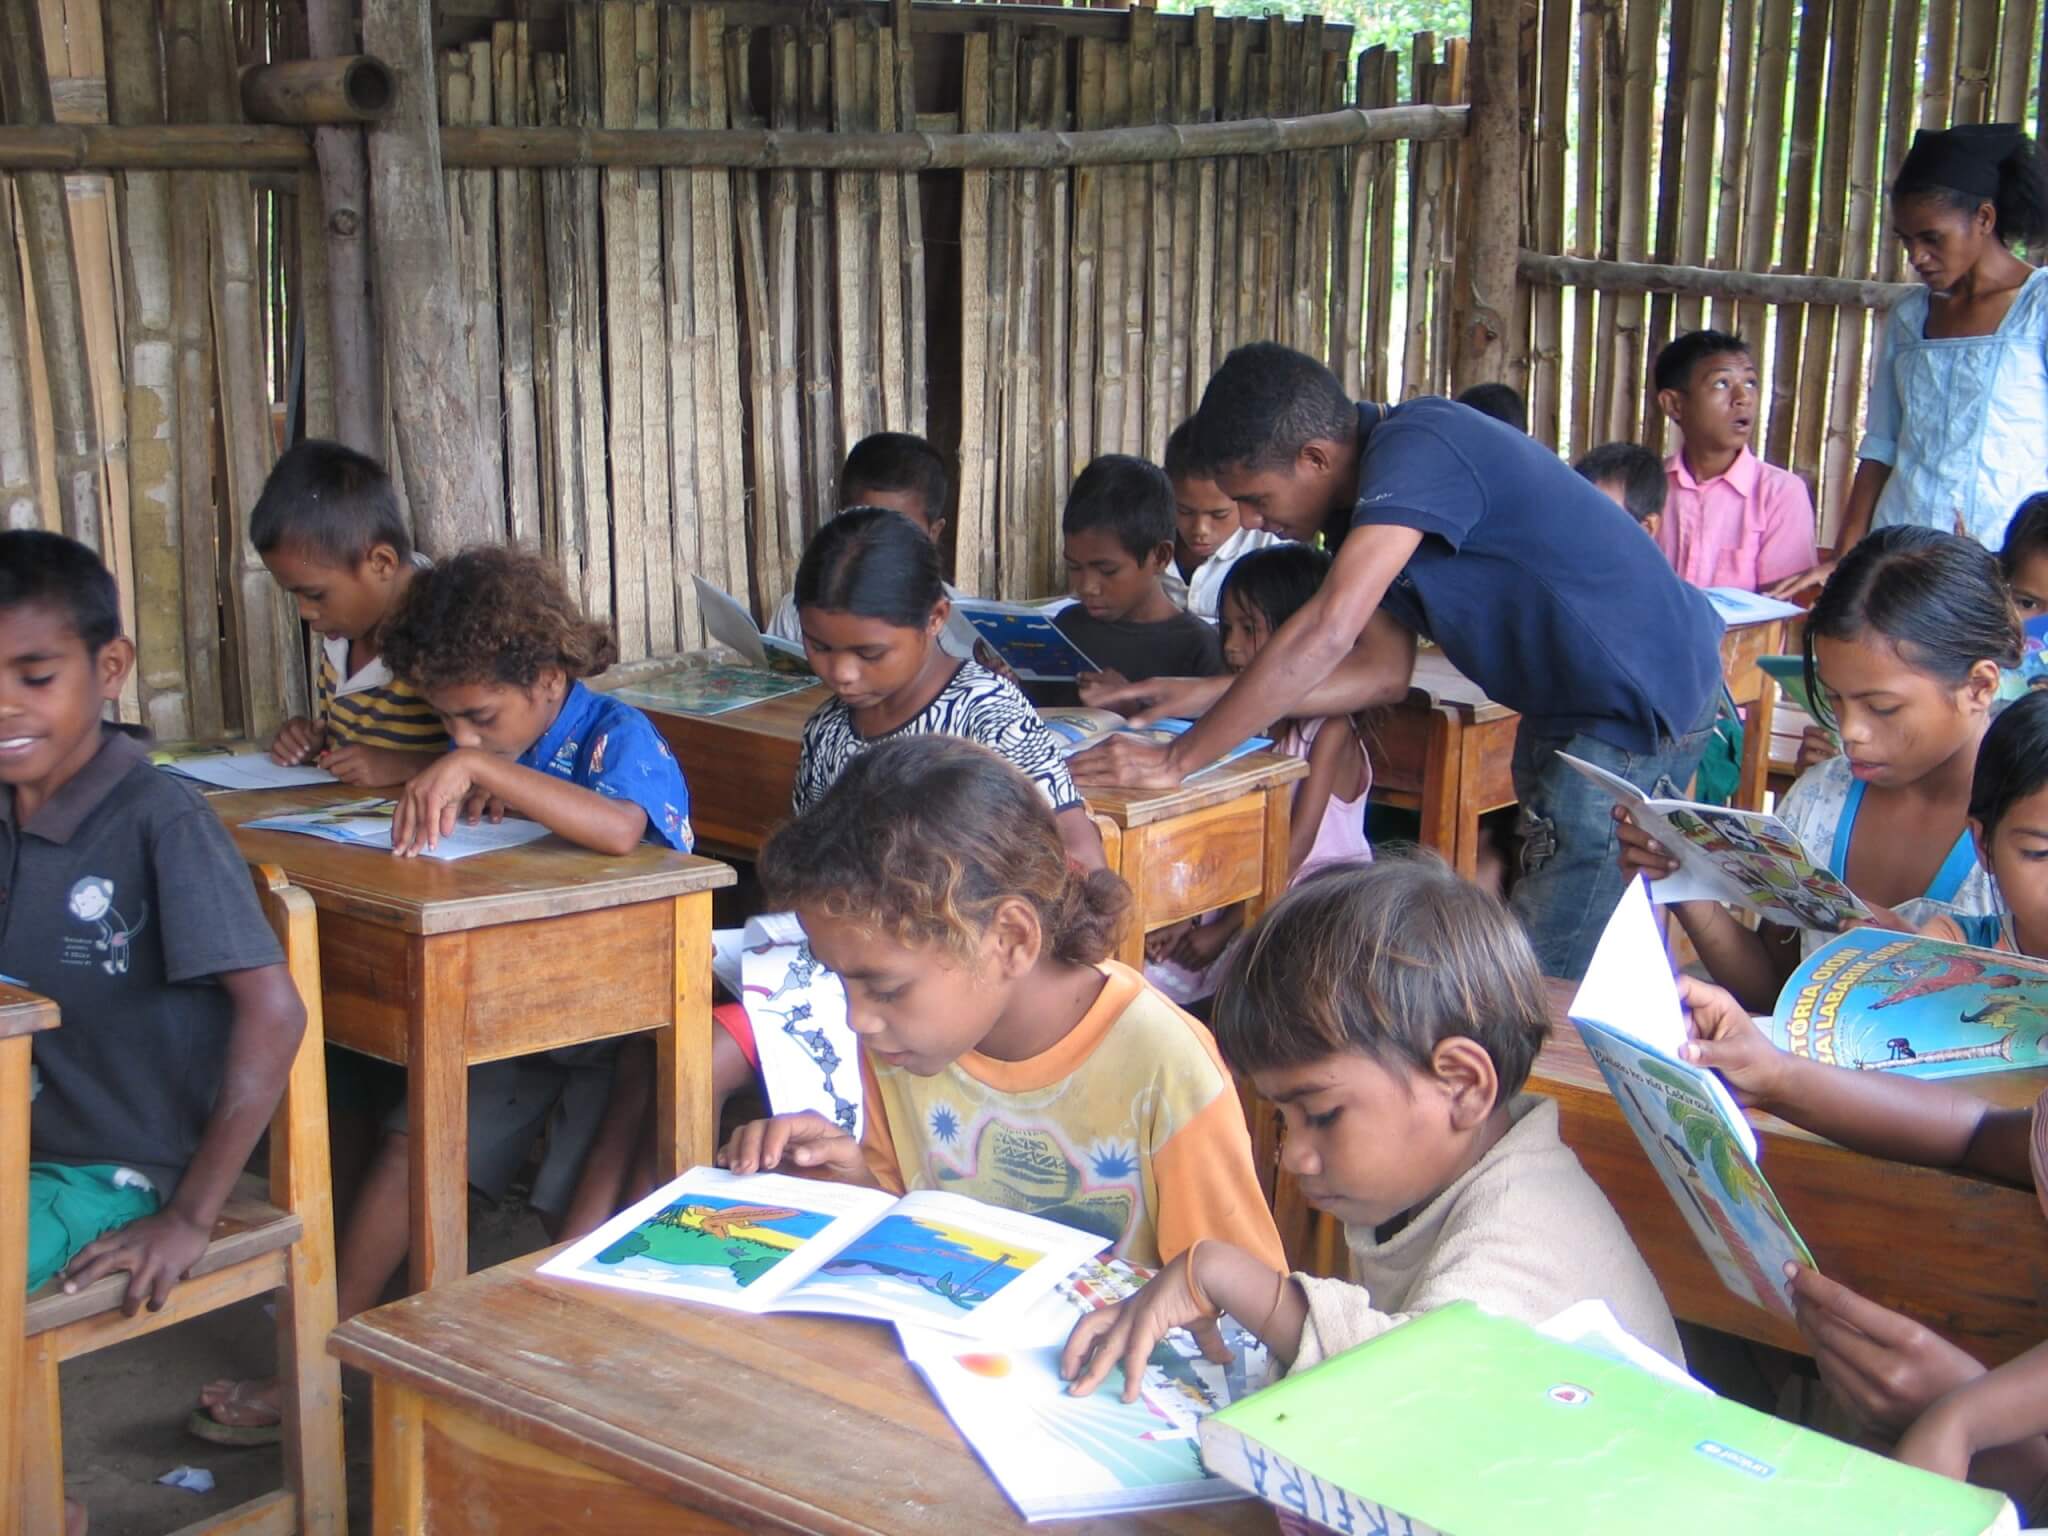 How improved Access to Education can benefit East-Timor’s Population